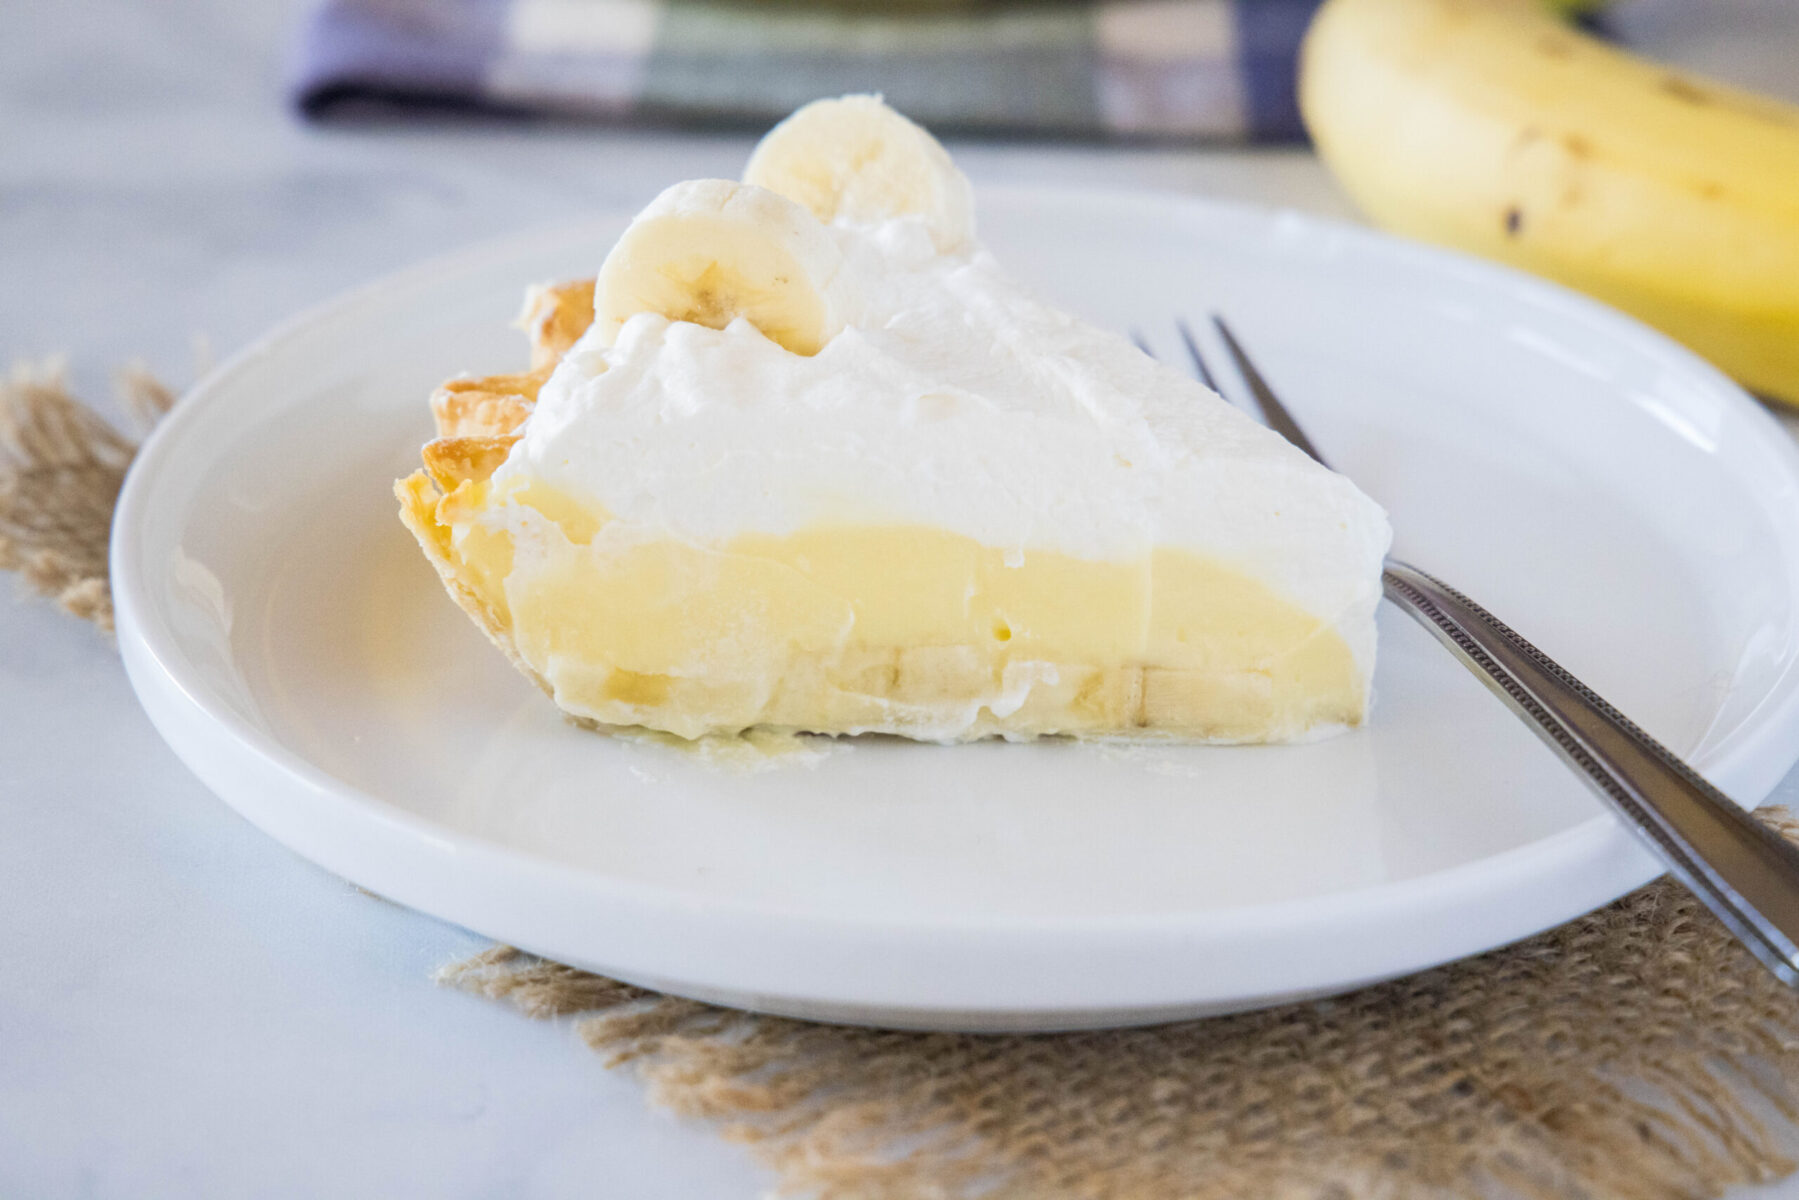 A slice of banana cream pie on a plate with a fork, with a banana in the background